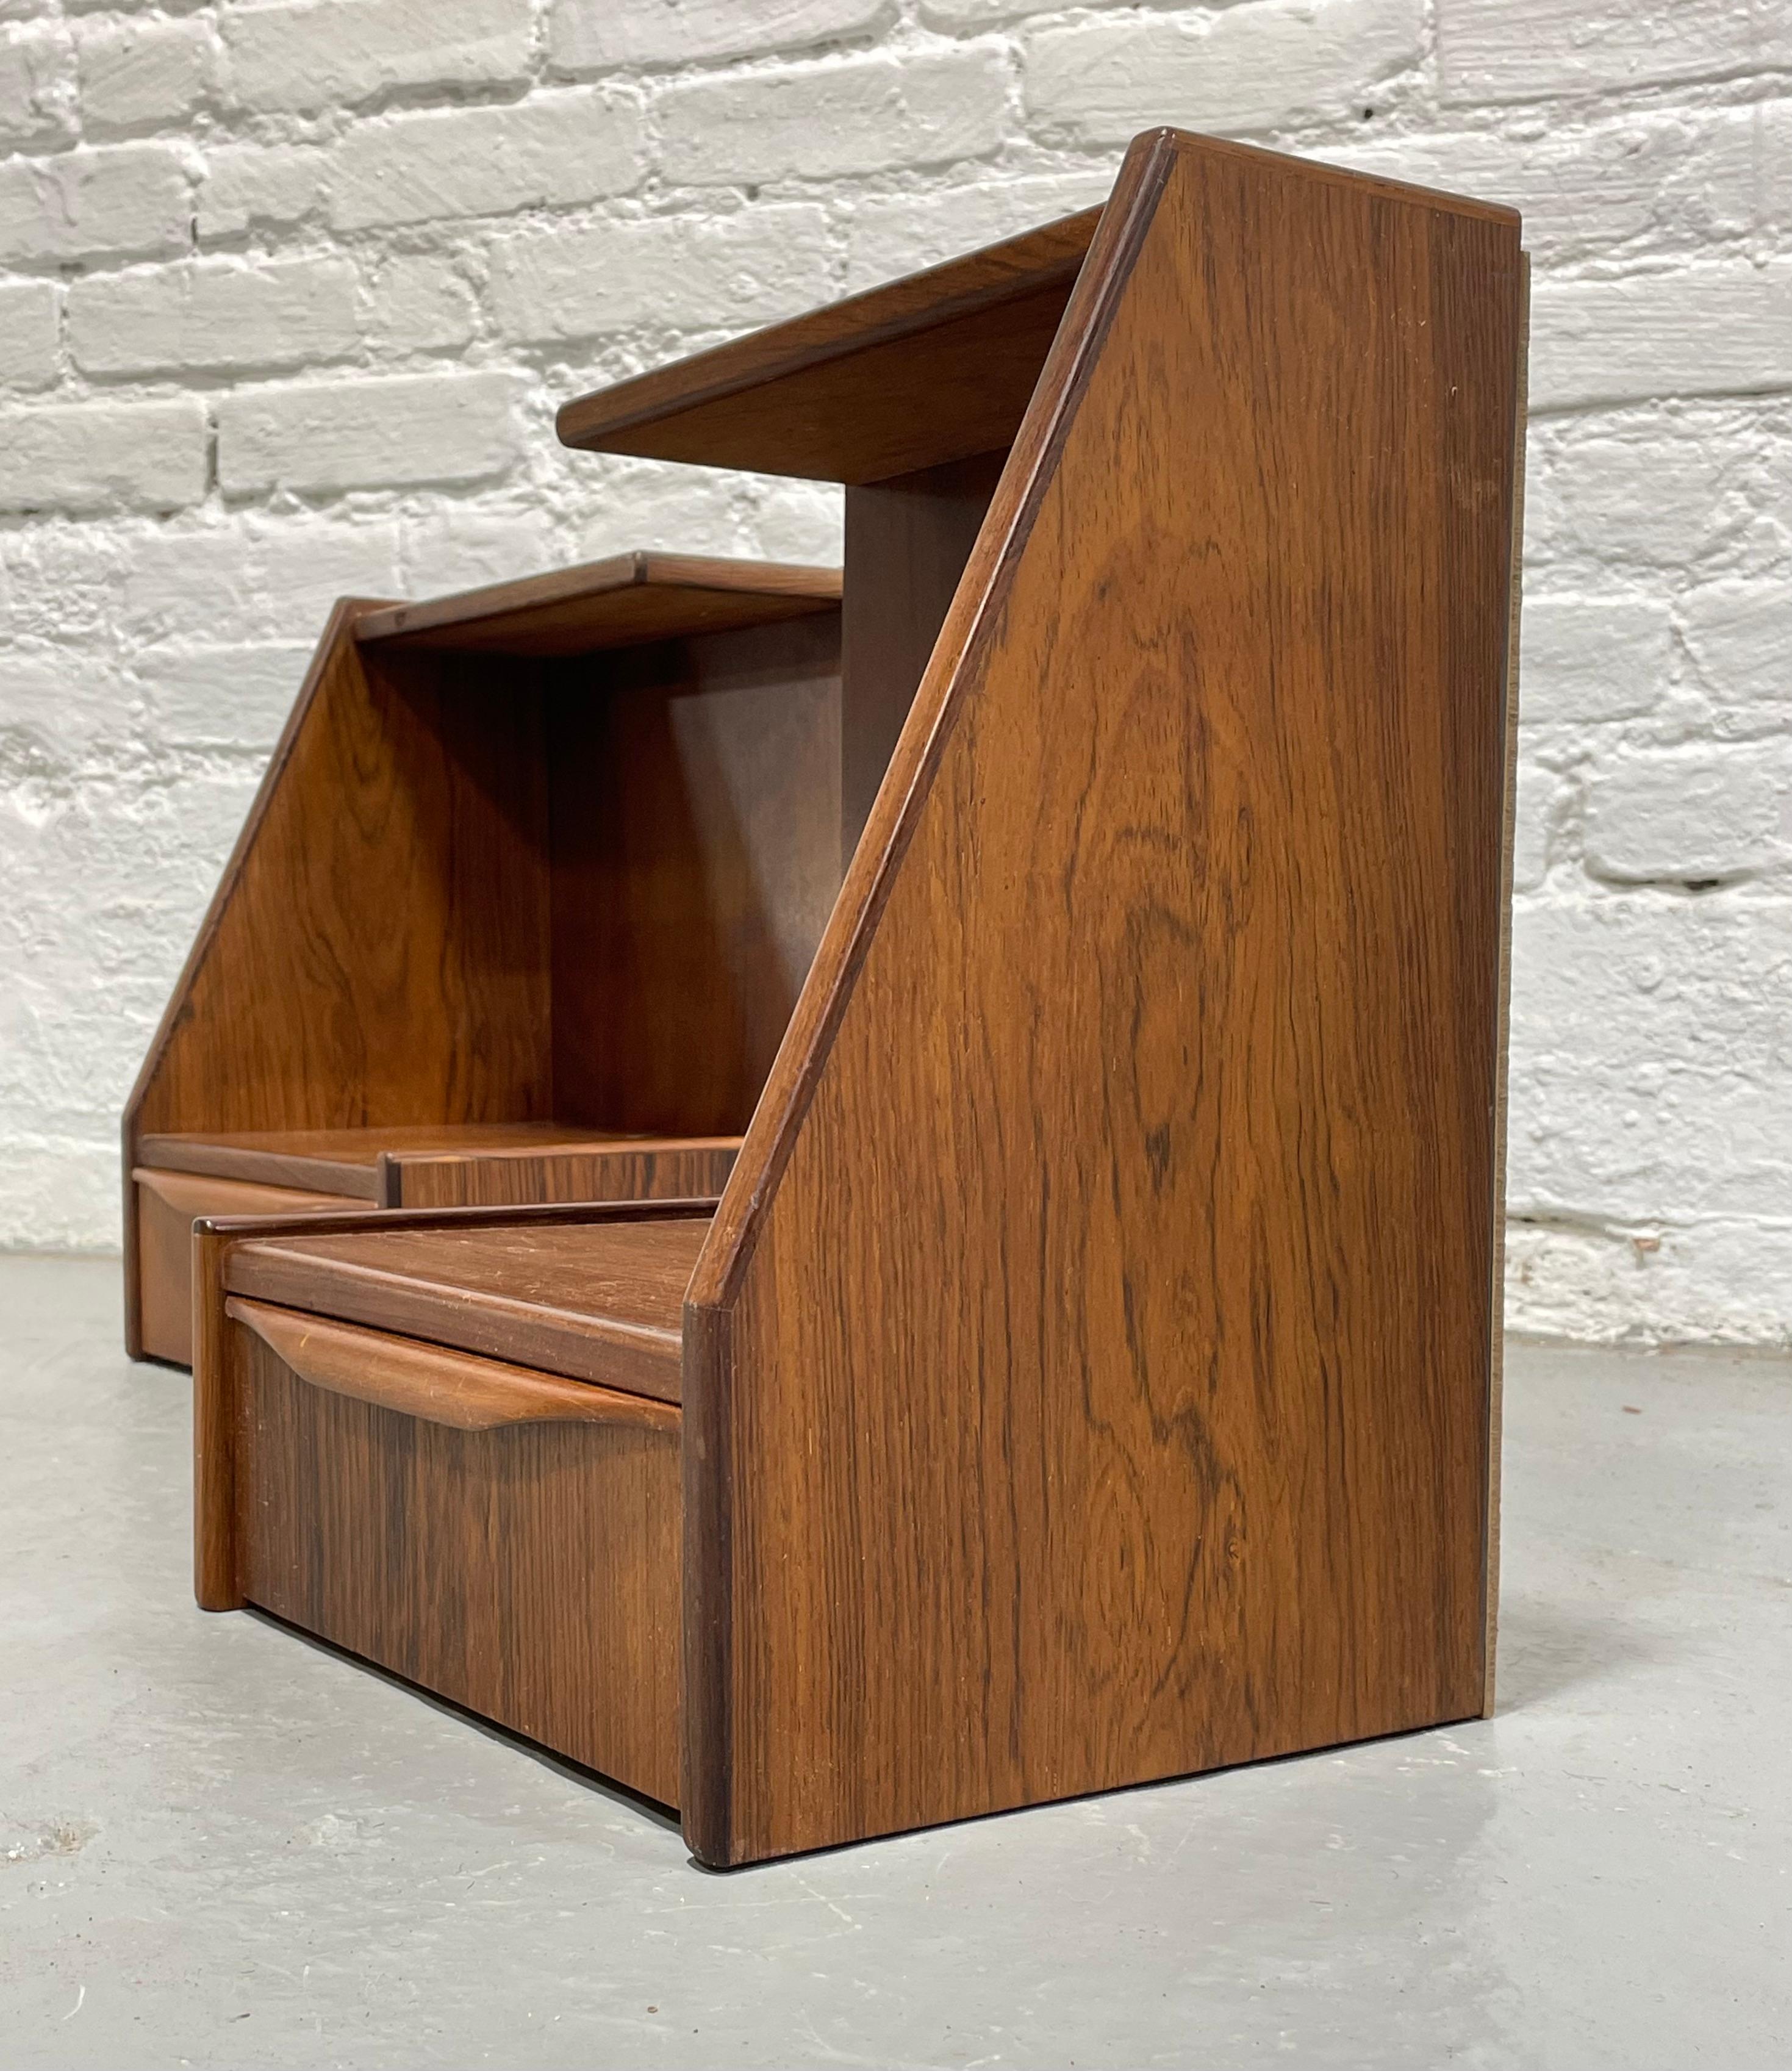 DANISH Mid Century Modern ROSEWOOD Hanging NIGHTSTANDS / Bedside Tables, c. 1950 For Sale 3